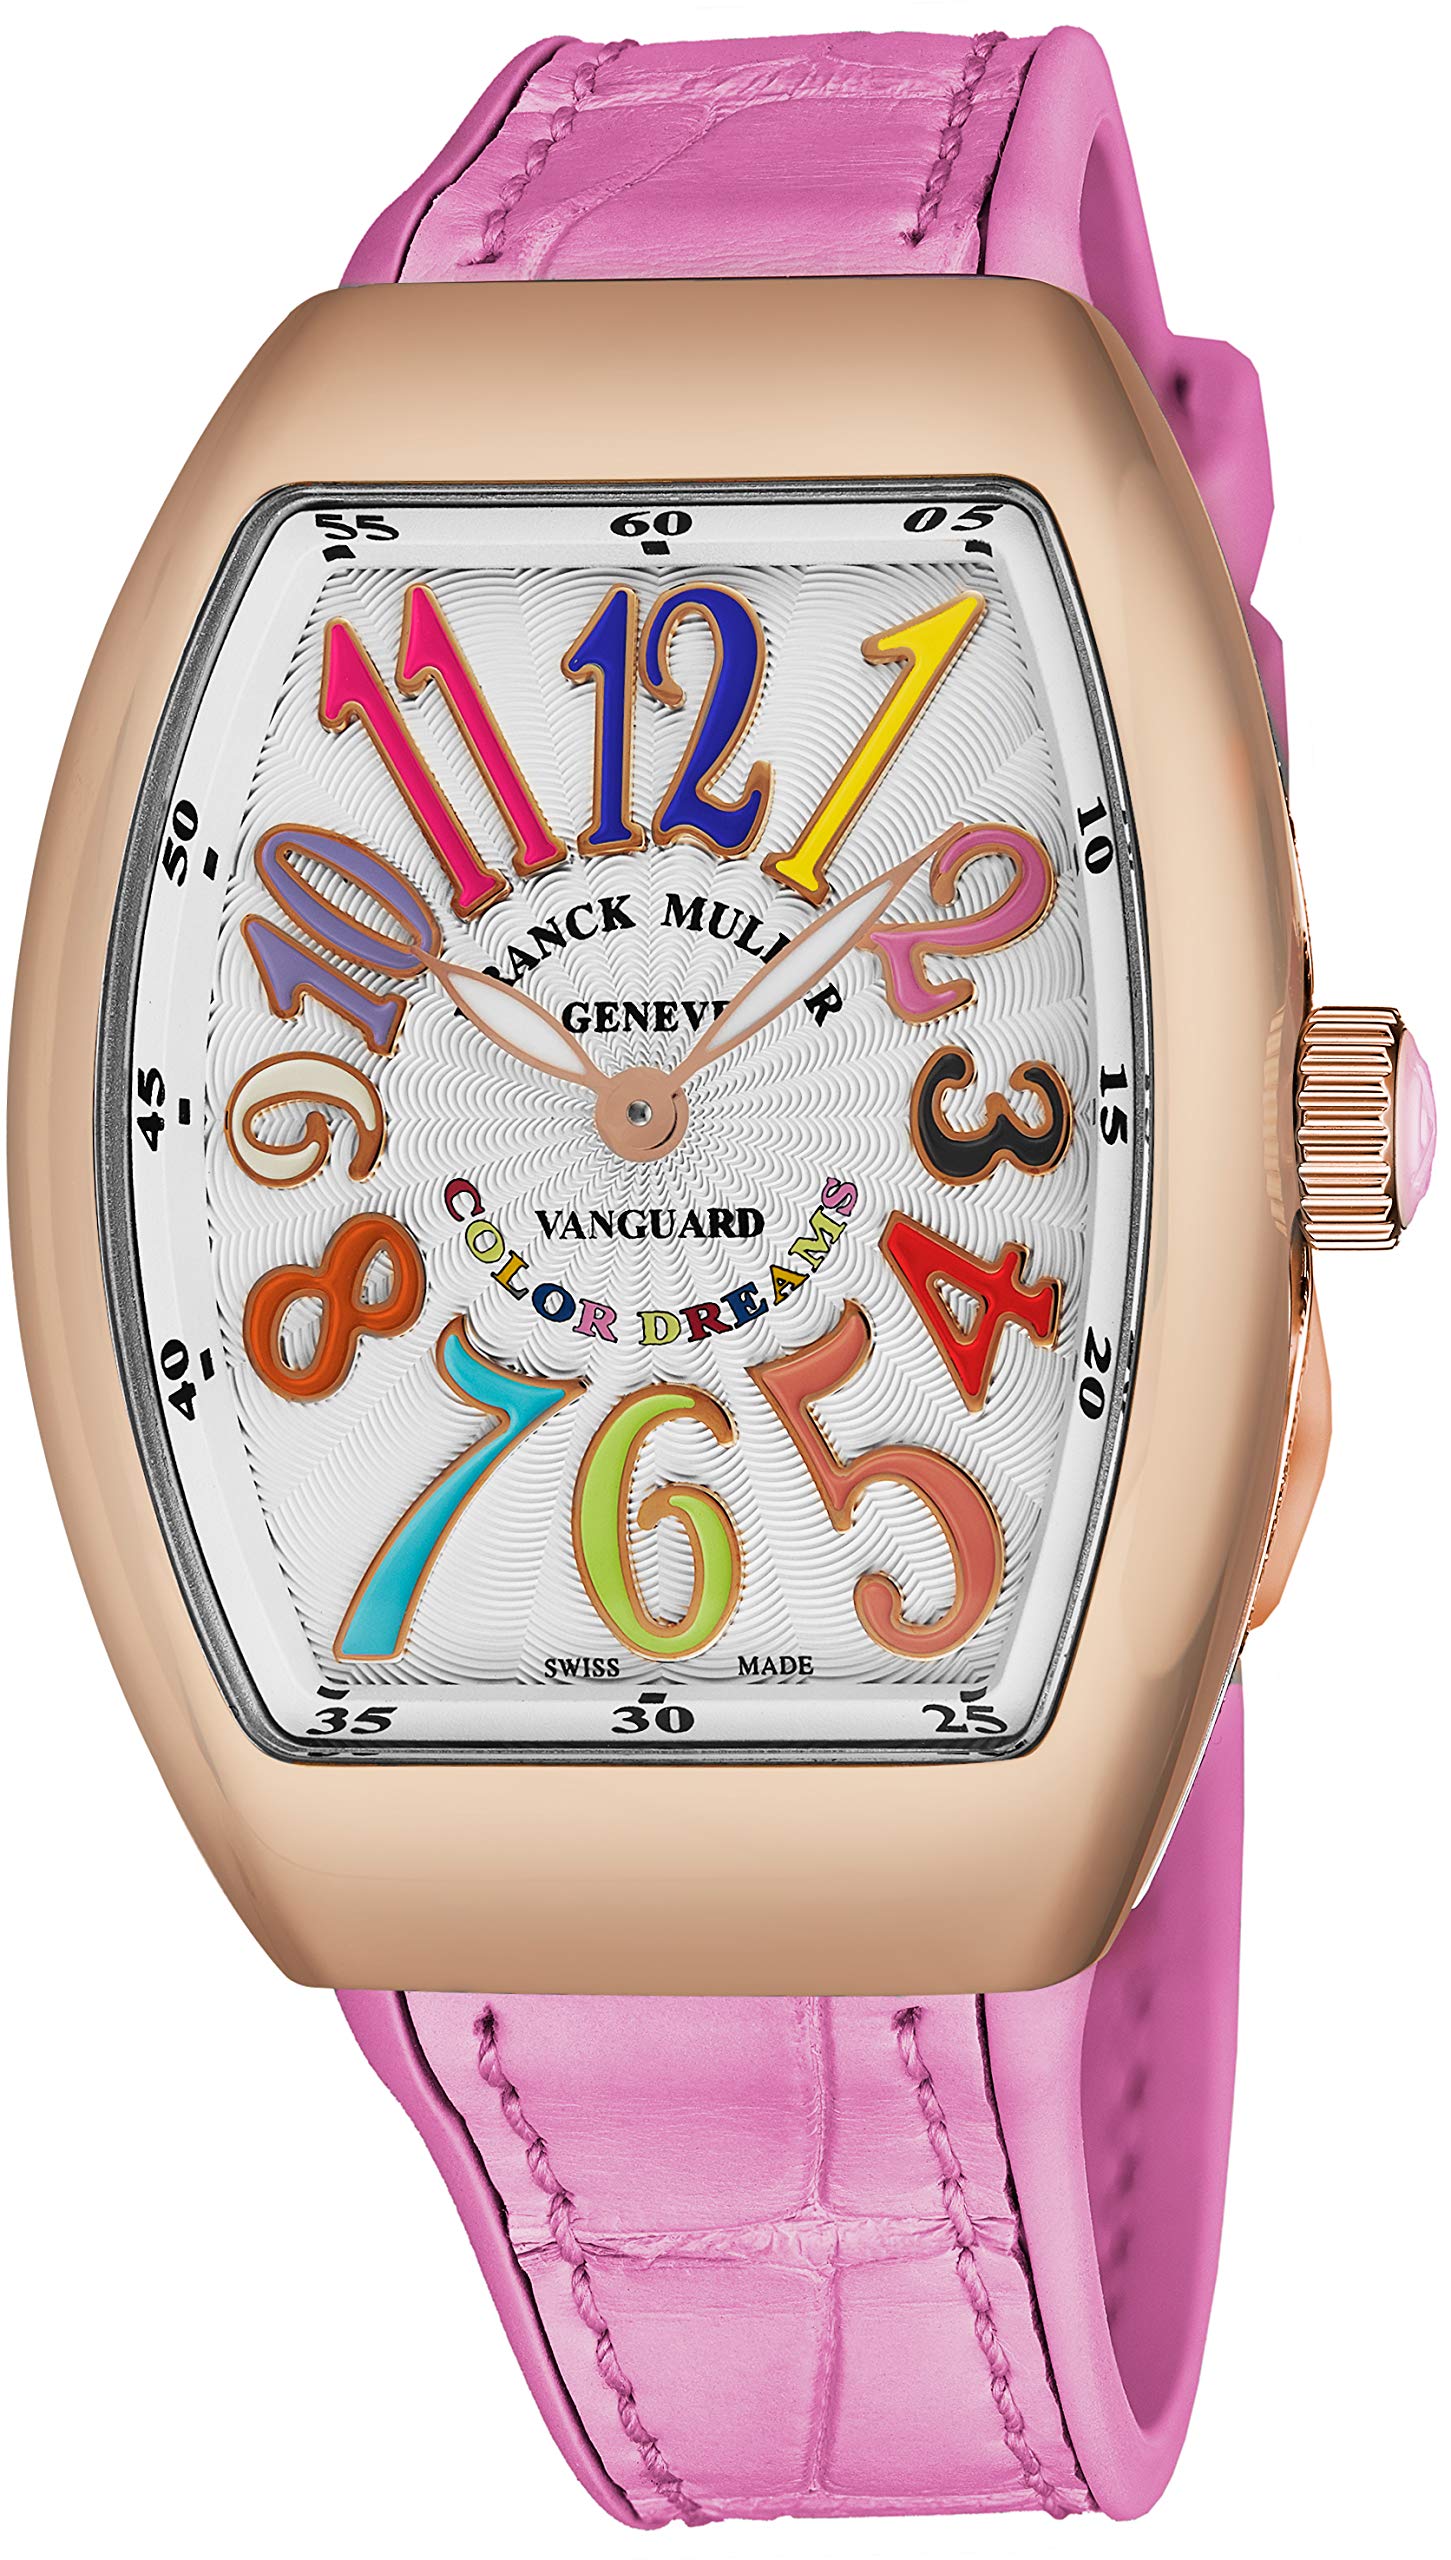 Franck Muller Vanguard Color Dreams Womens 18K Rose Gold Swiss Quartz Watch Tonneau Silver Face with Luminous Hands and Sapphire Crystal - Pink Leather/Rubber Strap Ladies Watch V 32 SC at FO COL DRM